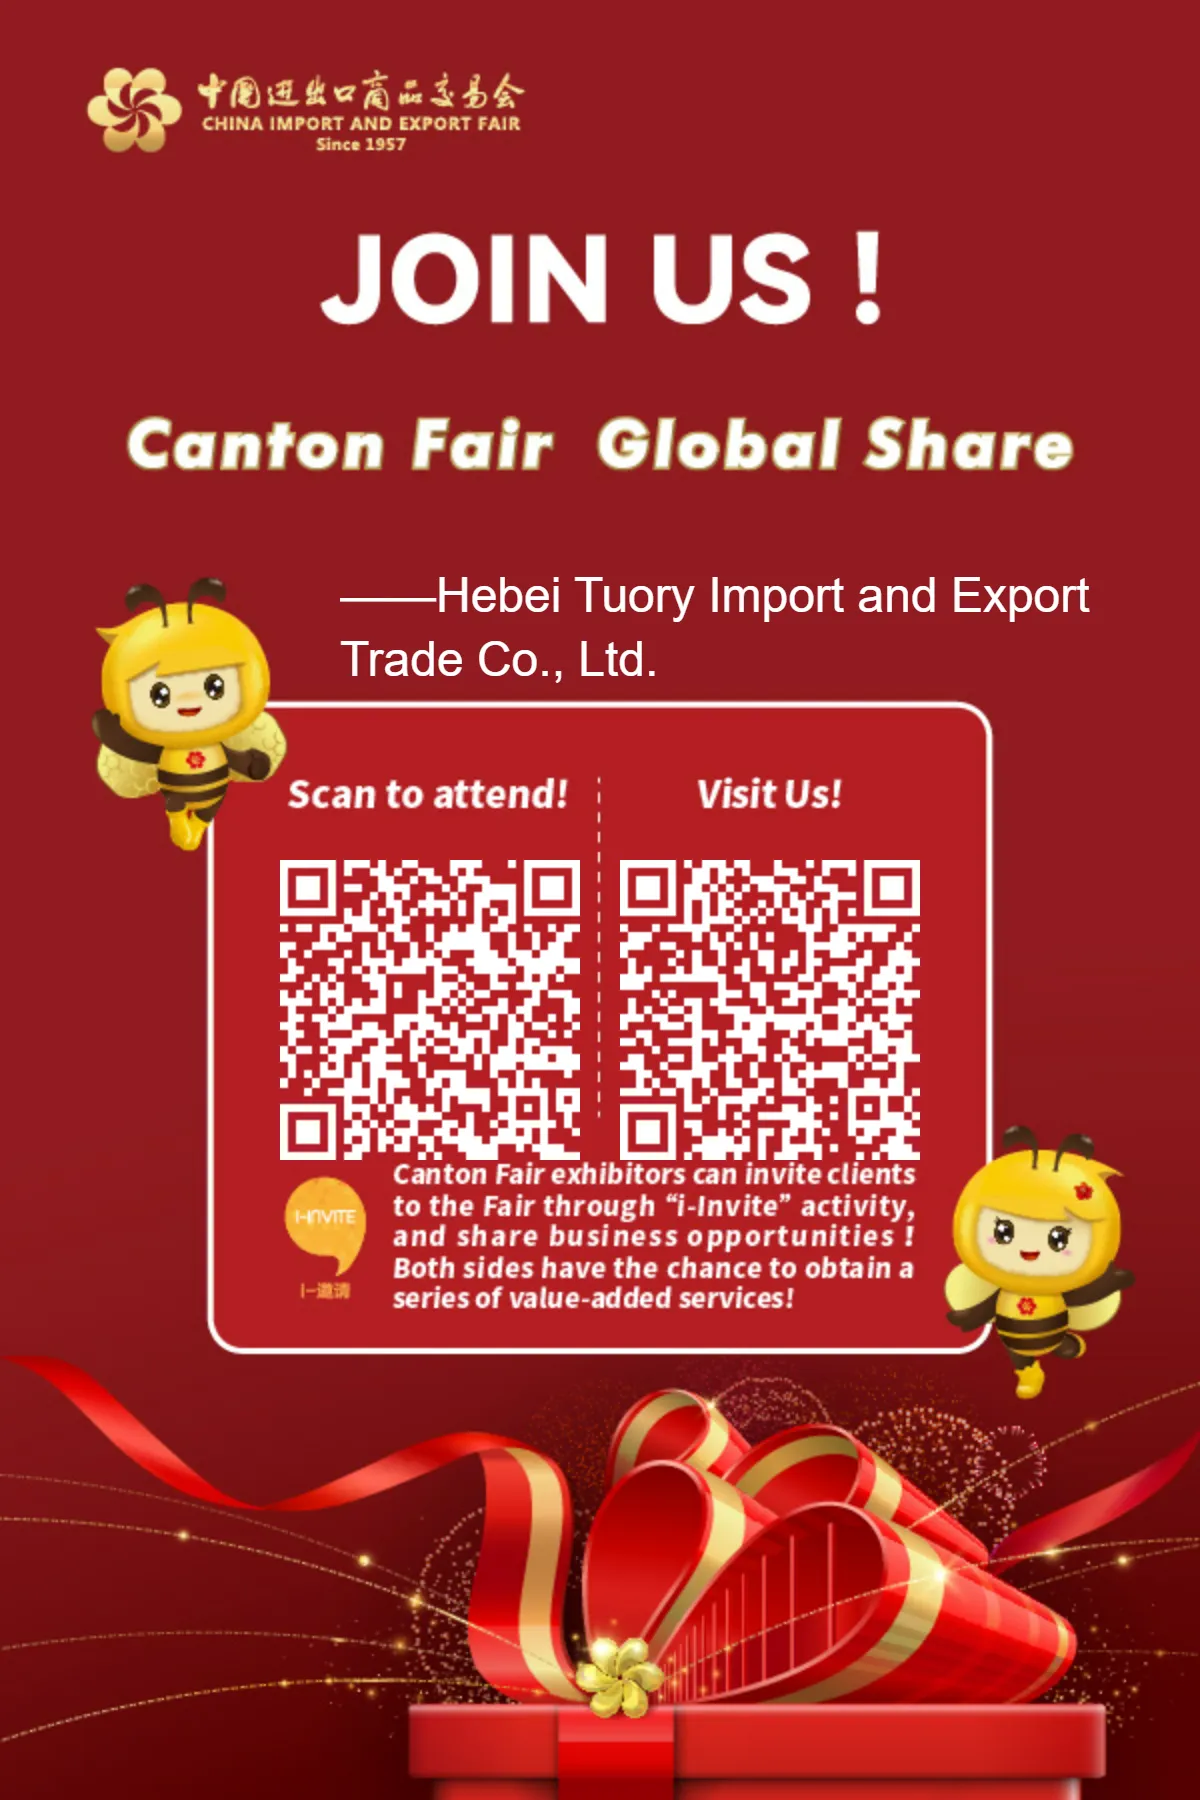 Welcome to Visit our Canton Fair Booth